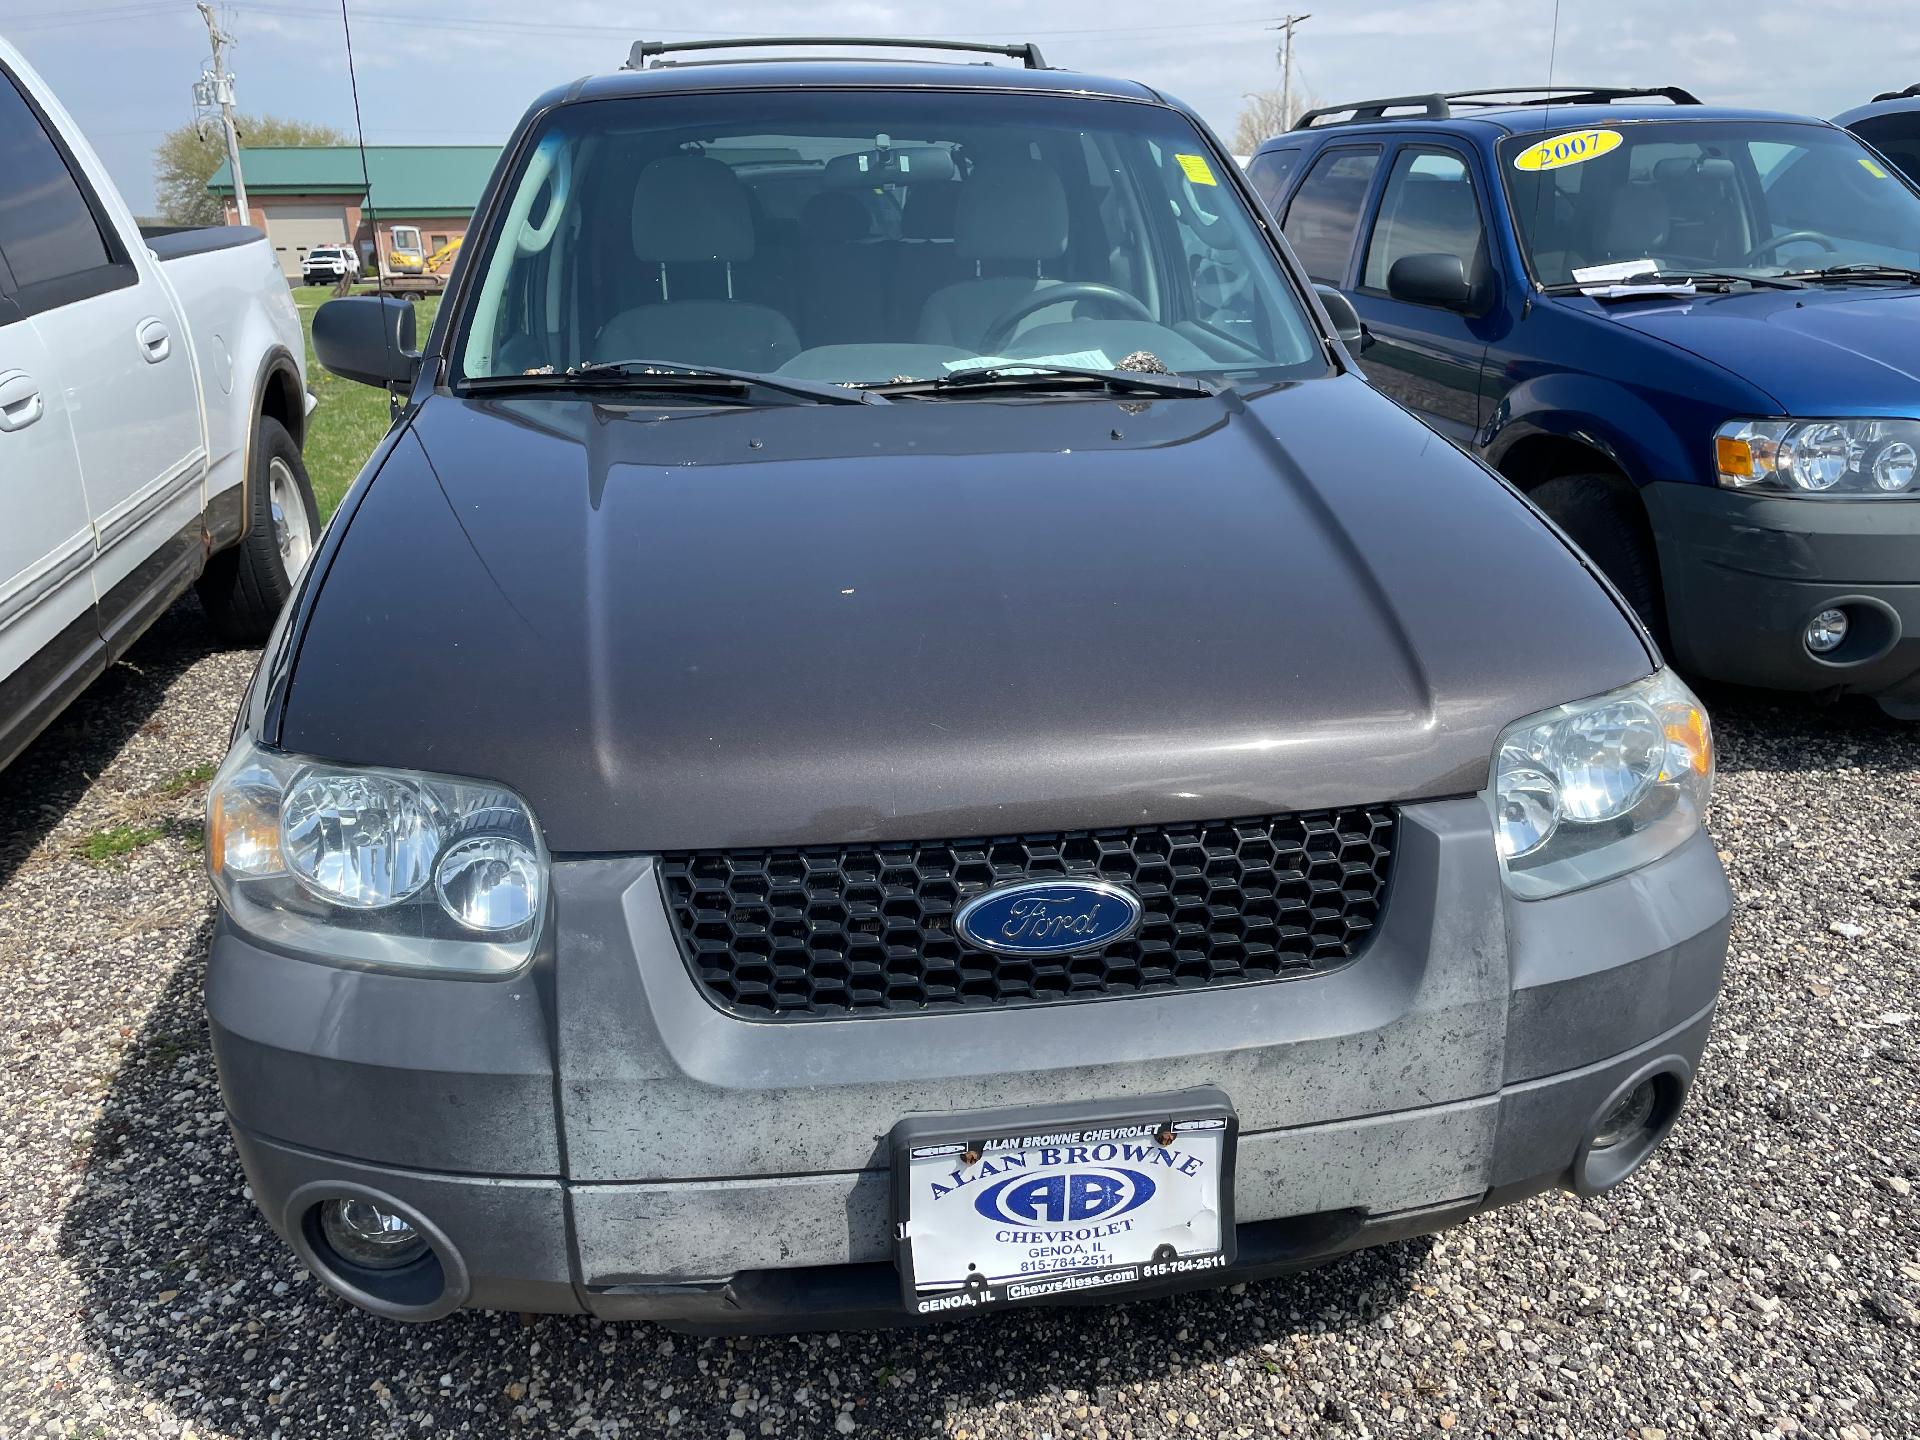 Used 2006 Ford Escape XLT with VIN 1FMCU93106KC03988 for sale in Genoa, IL